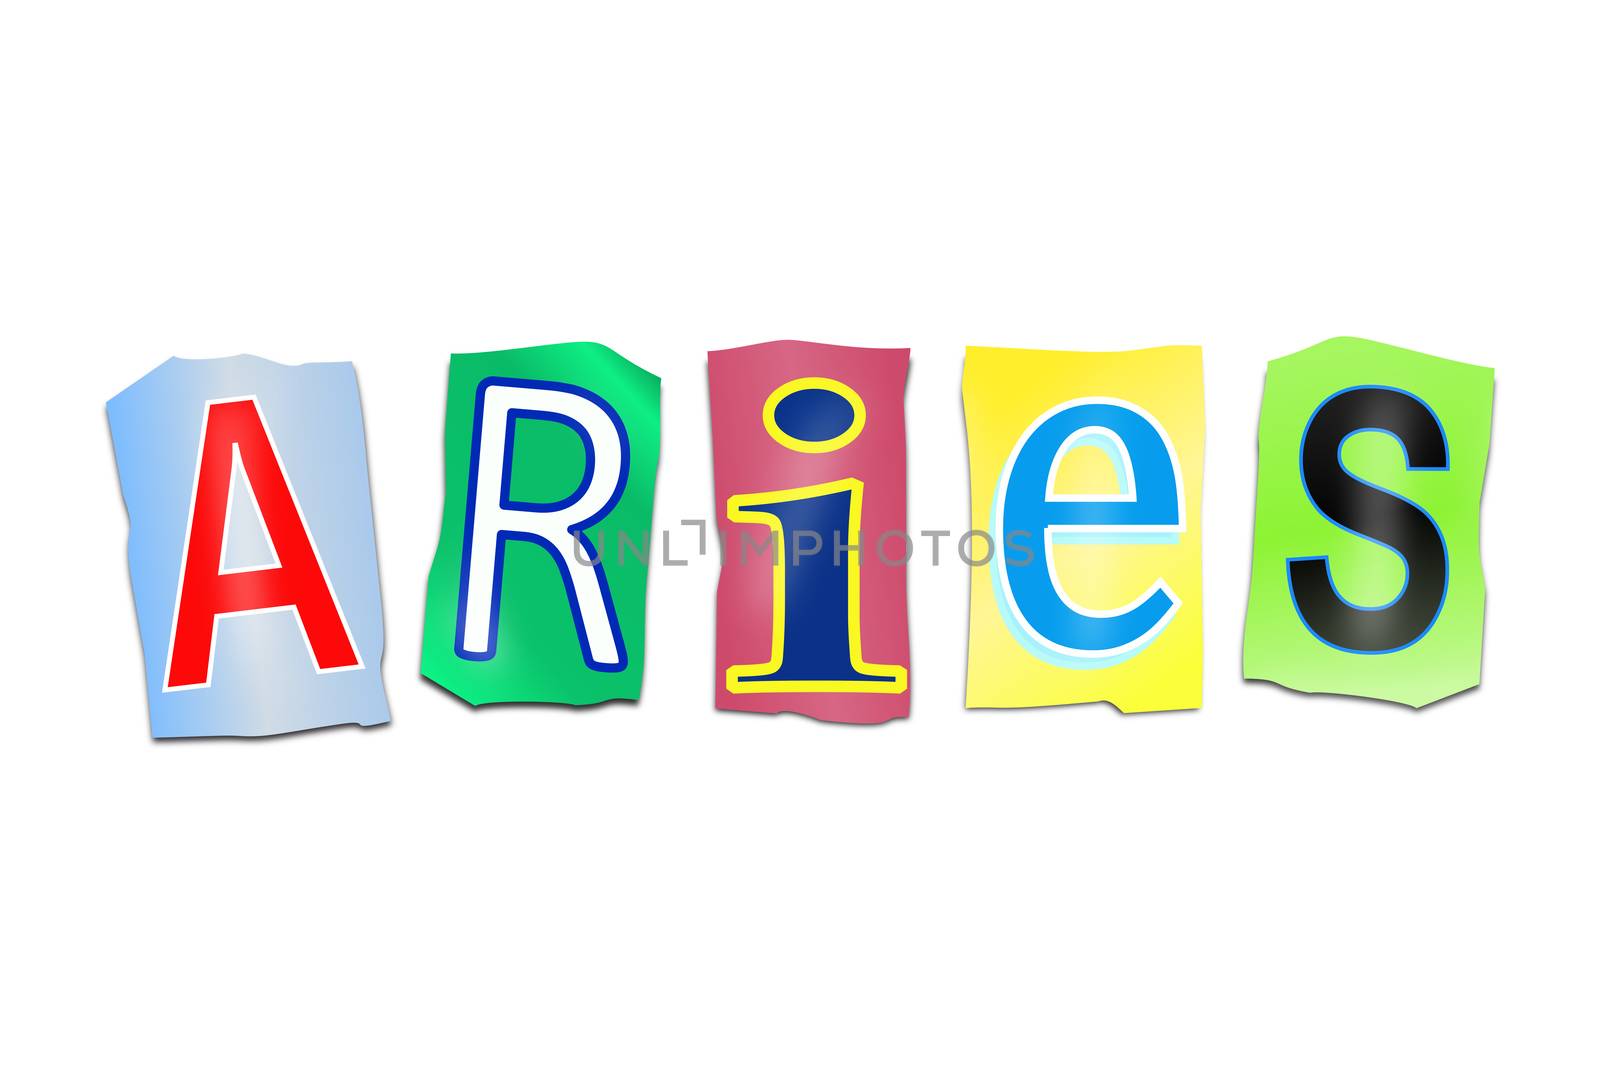 Illustration depicting a set of cut out printed letters arranged to form the word Aries.